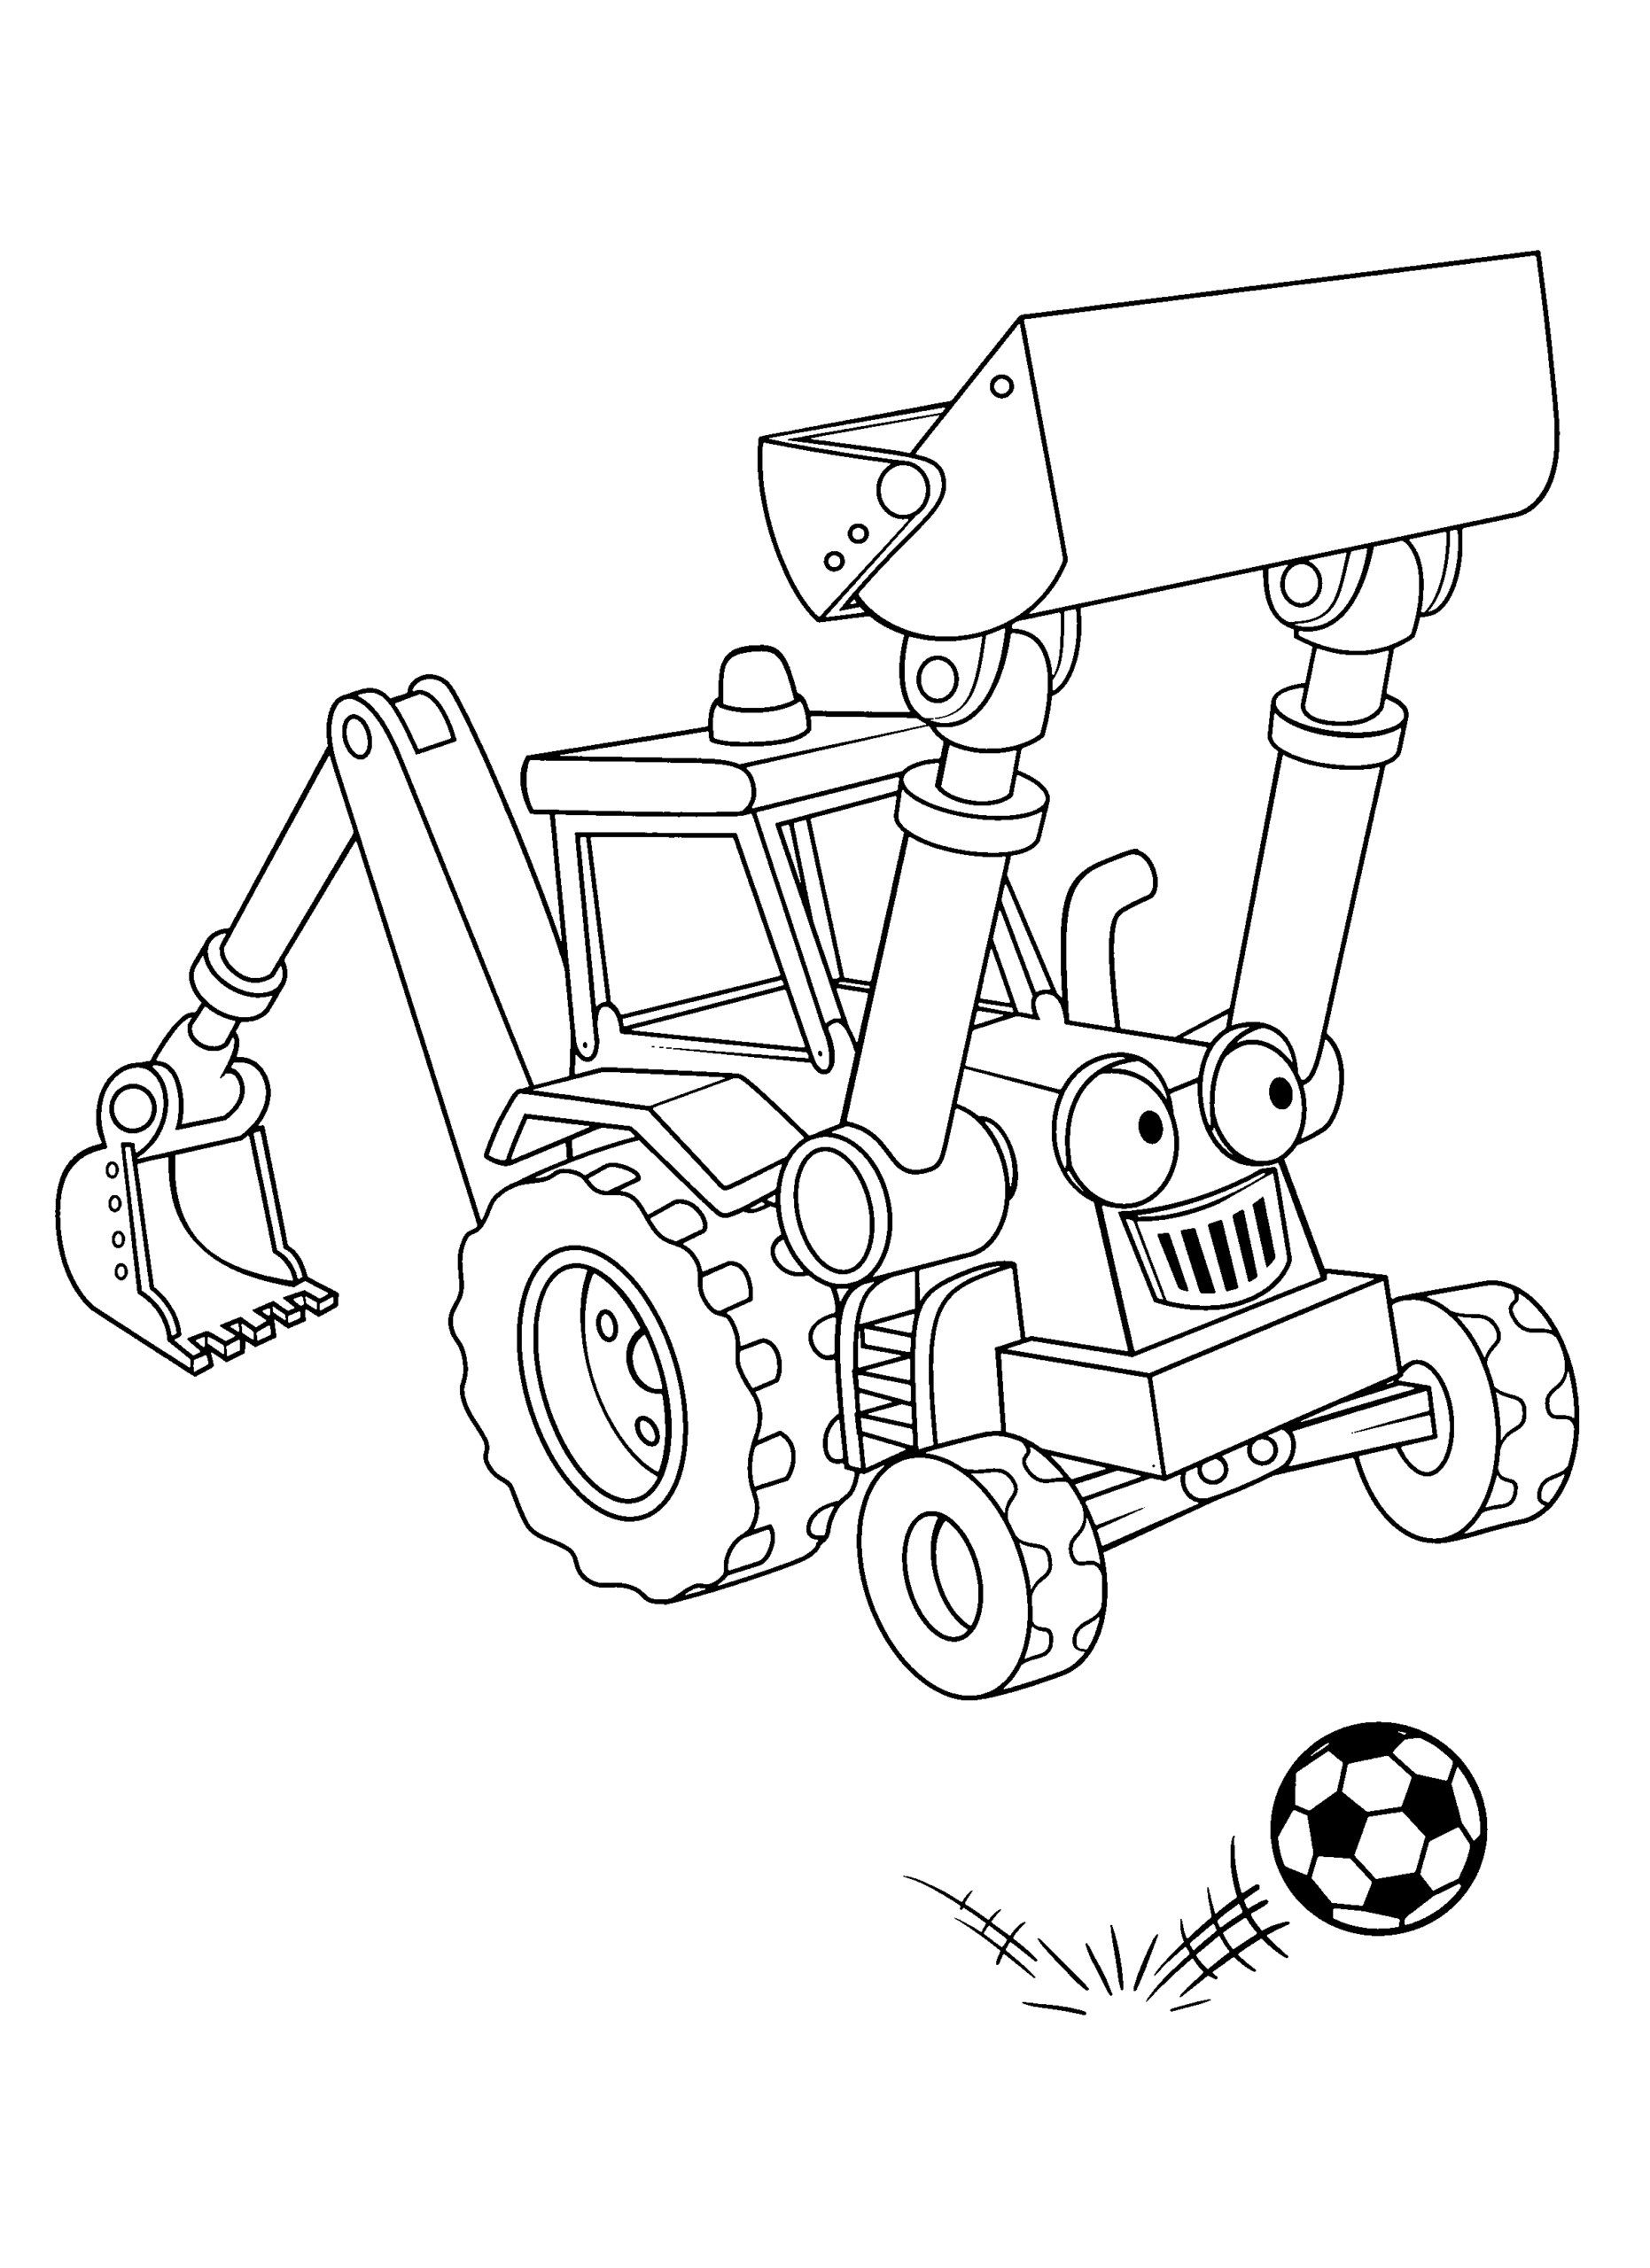 Bob the Builder Coloring Pages TV Film bob the builder 5 Printable 2020 01069 Coloring4free